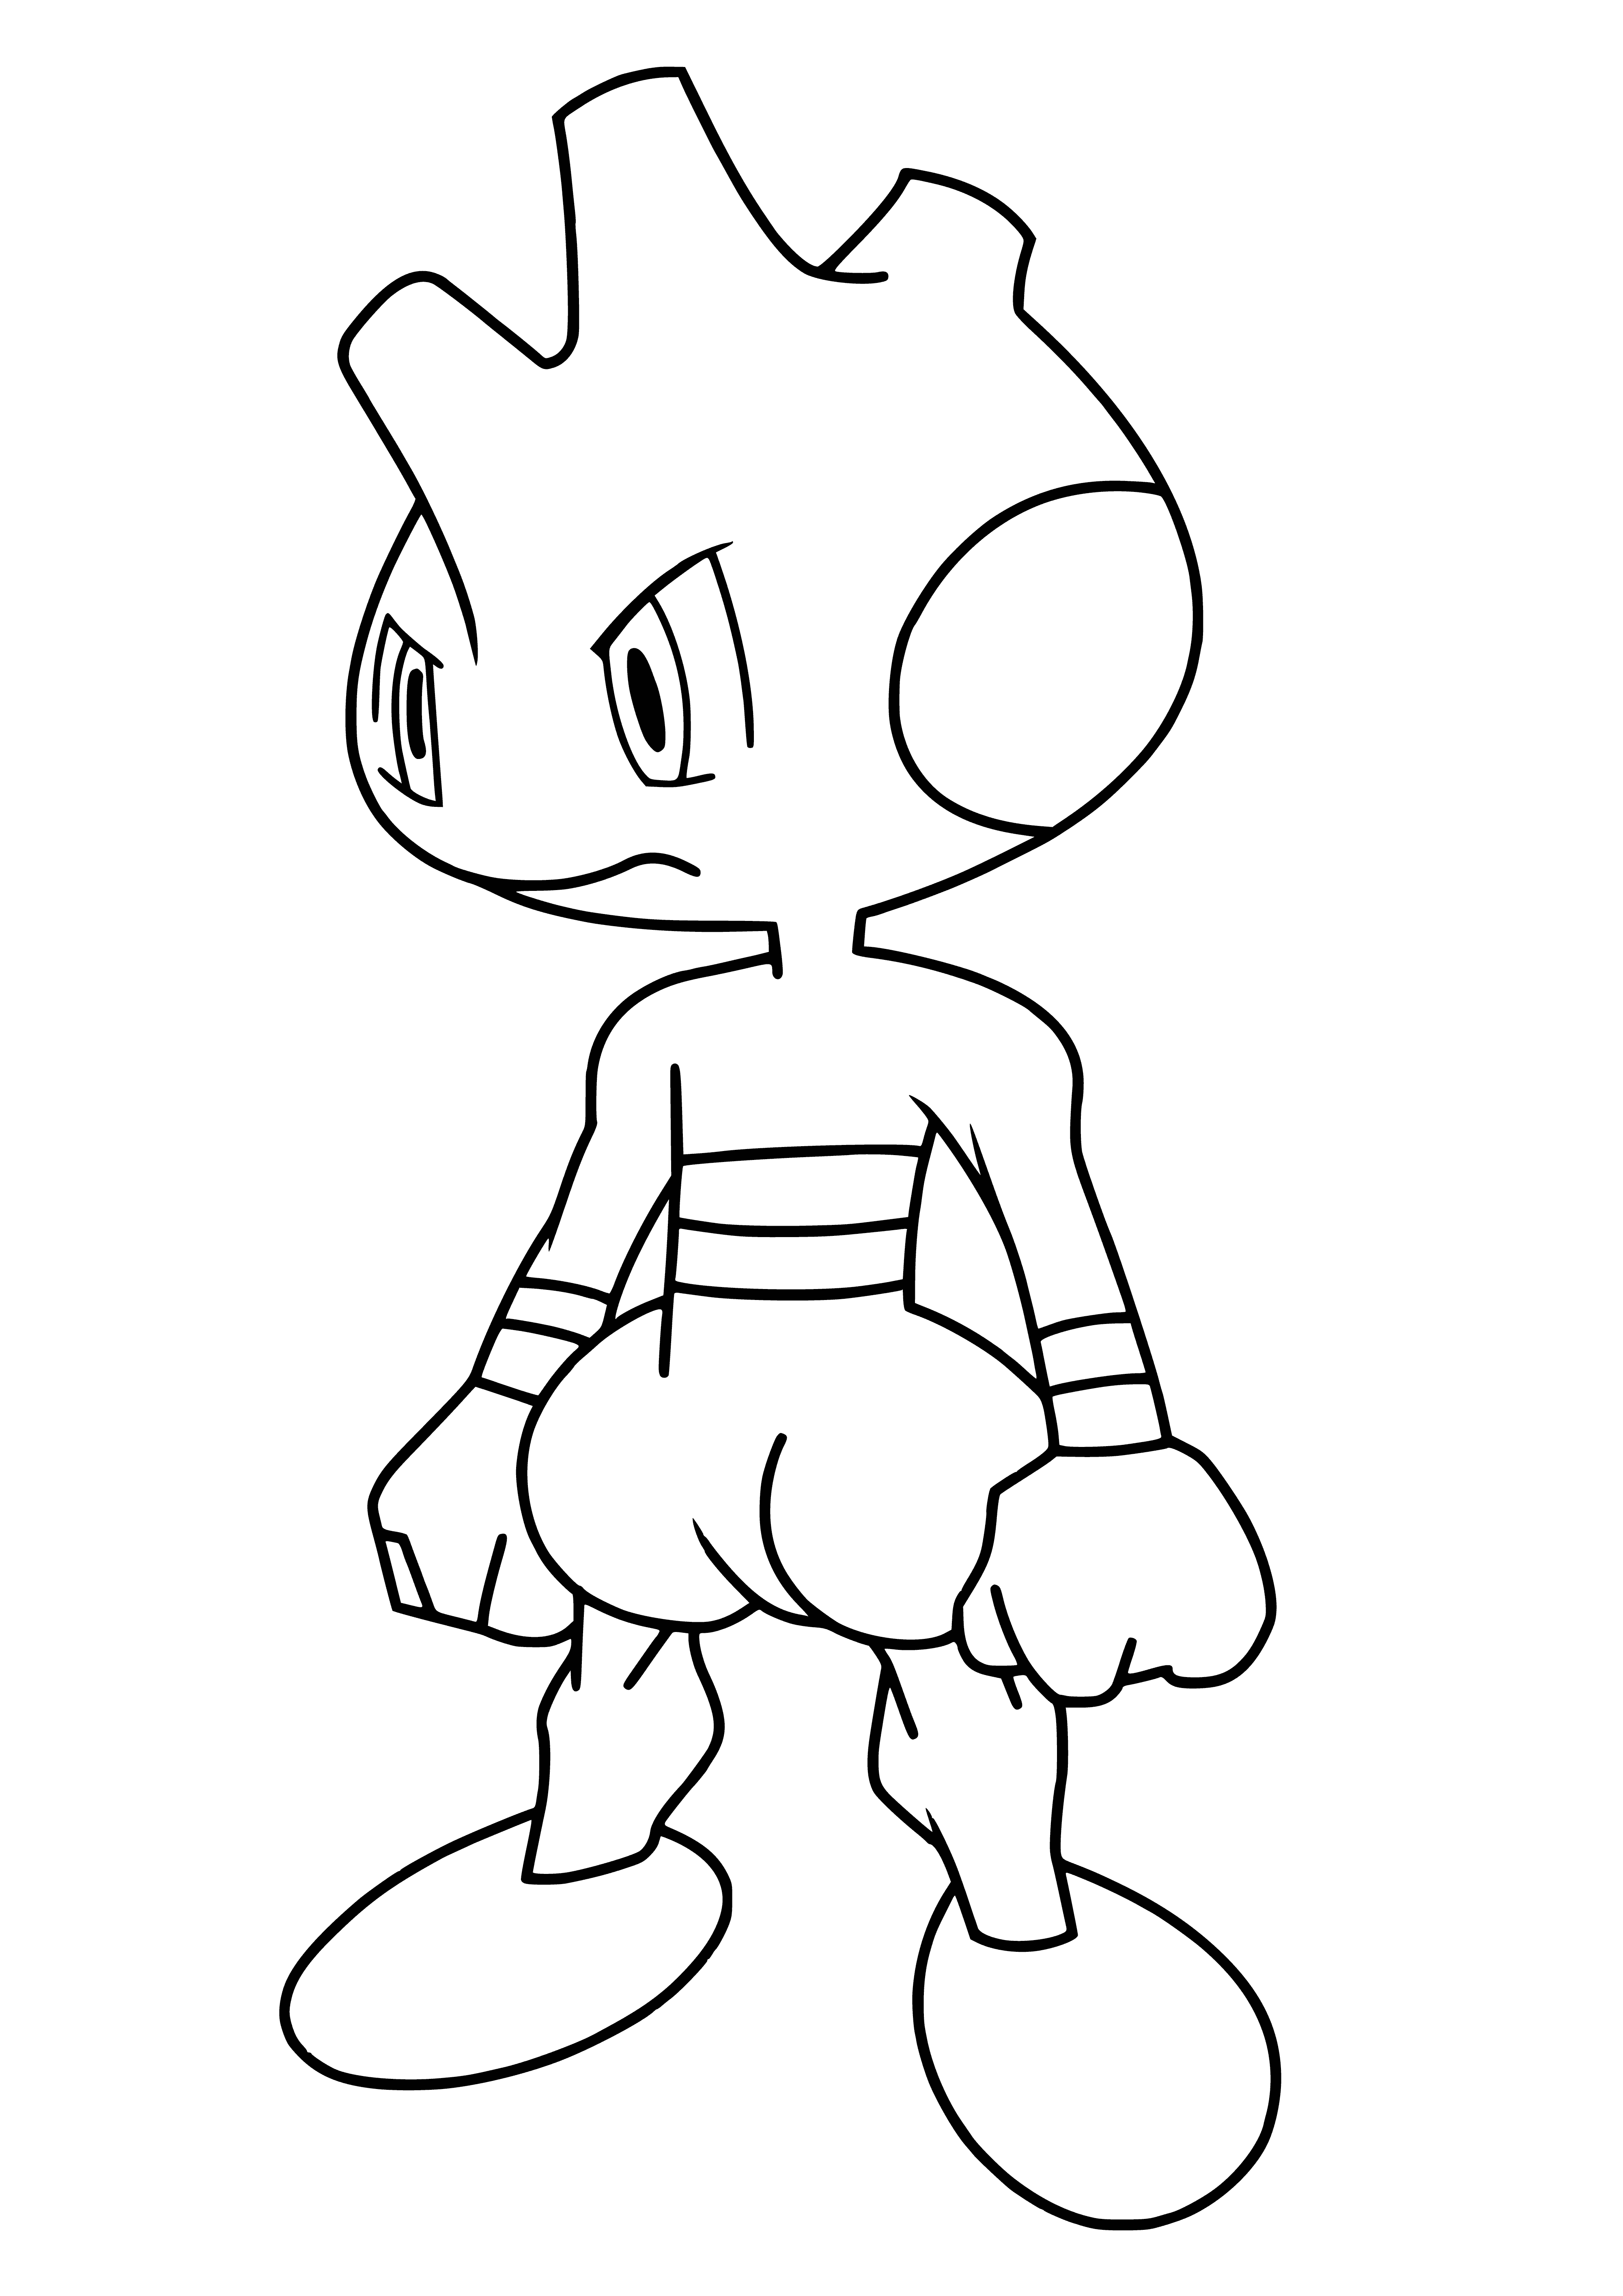 coloring page: Small brown humanoid Pokémon w/ black mask over eyes, horns, white gloves, boots & belt w/ black "buckle". Has short black tail.